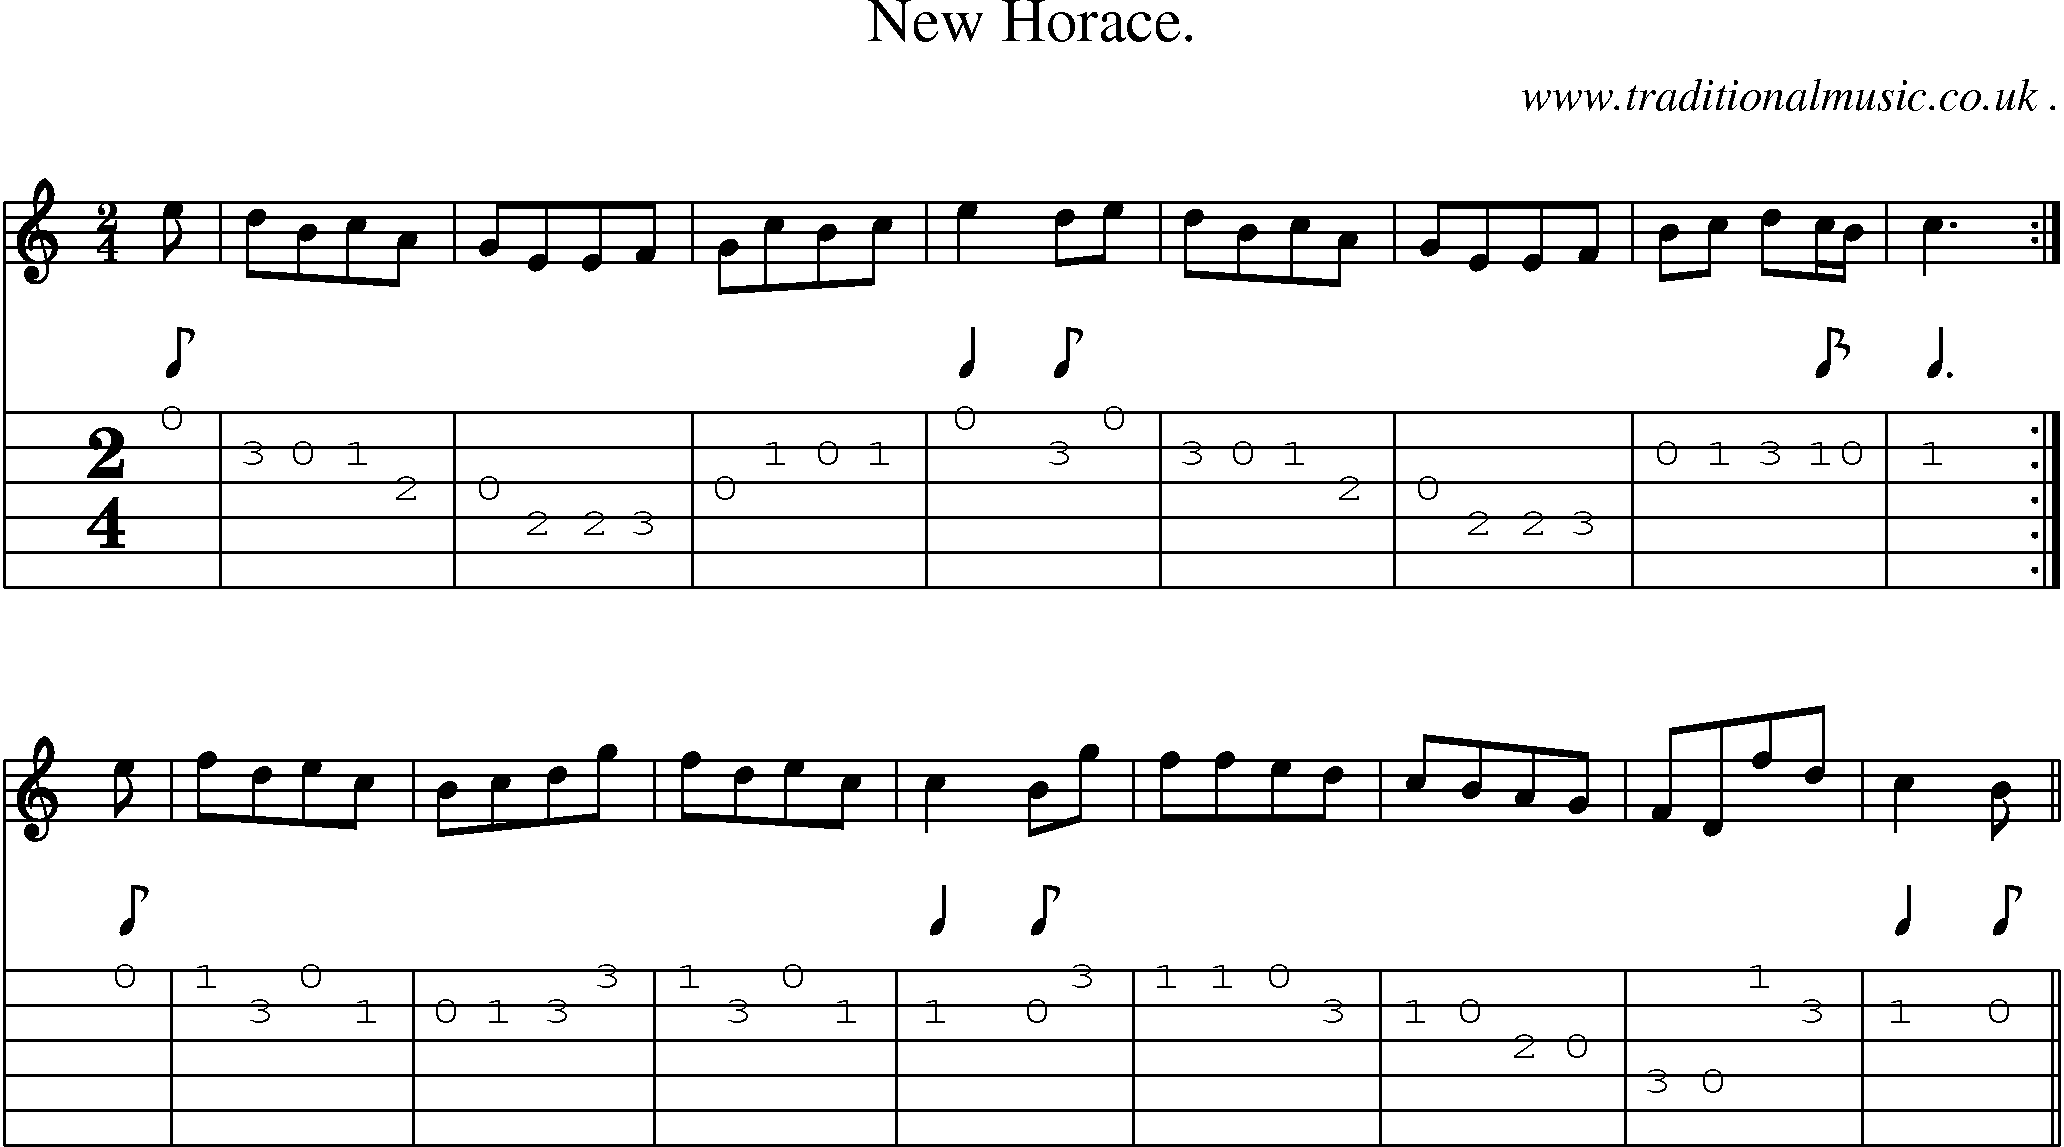 Sheet-Music and Guitar Tabs for New Horace